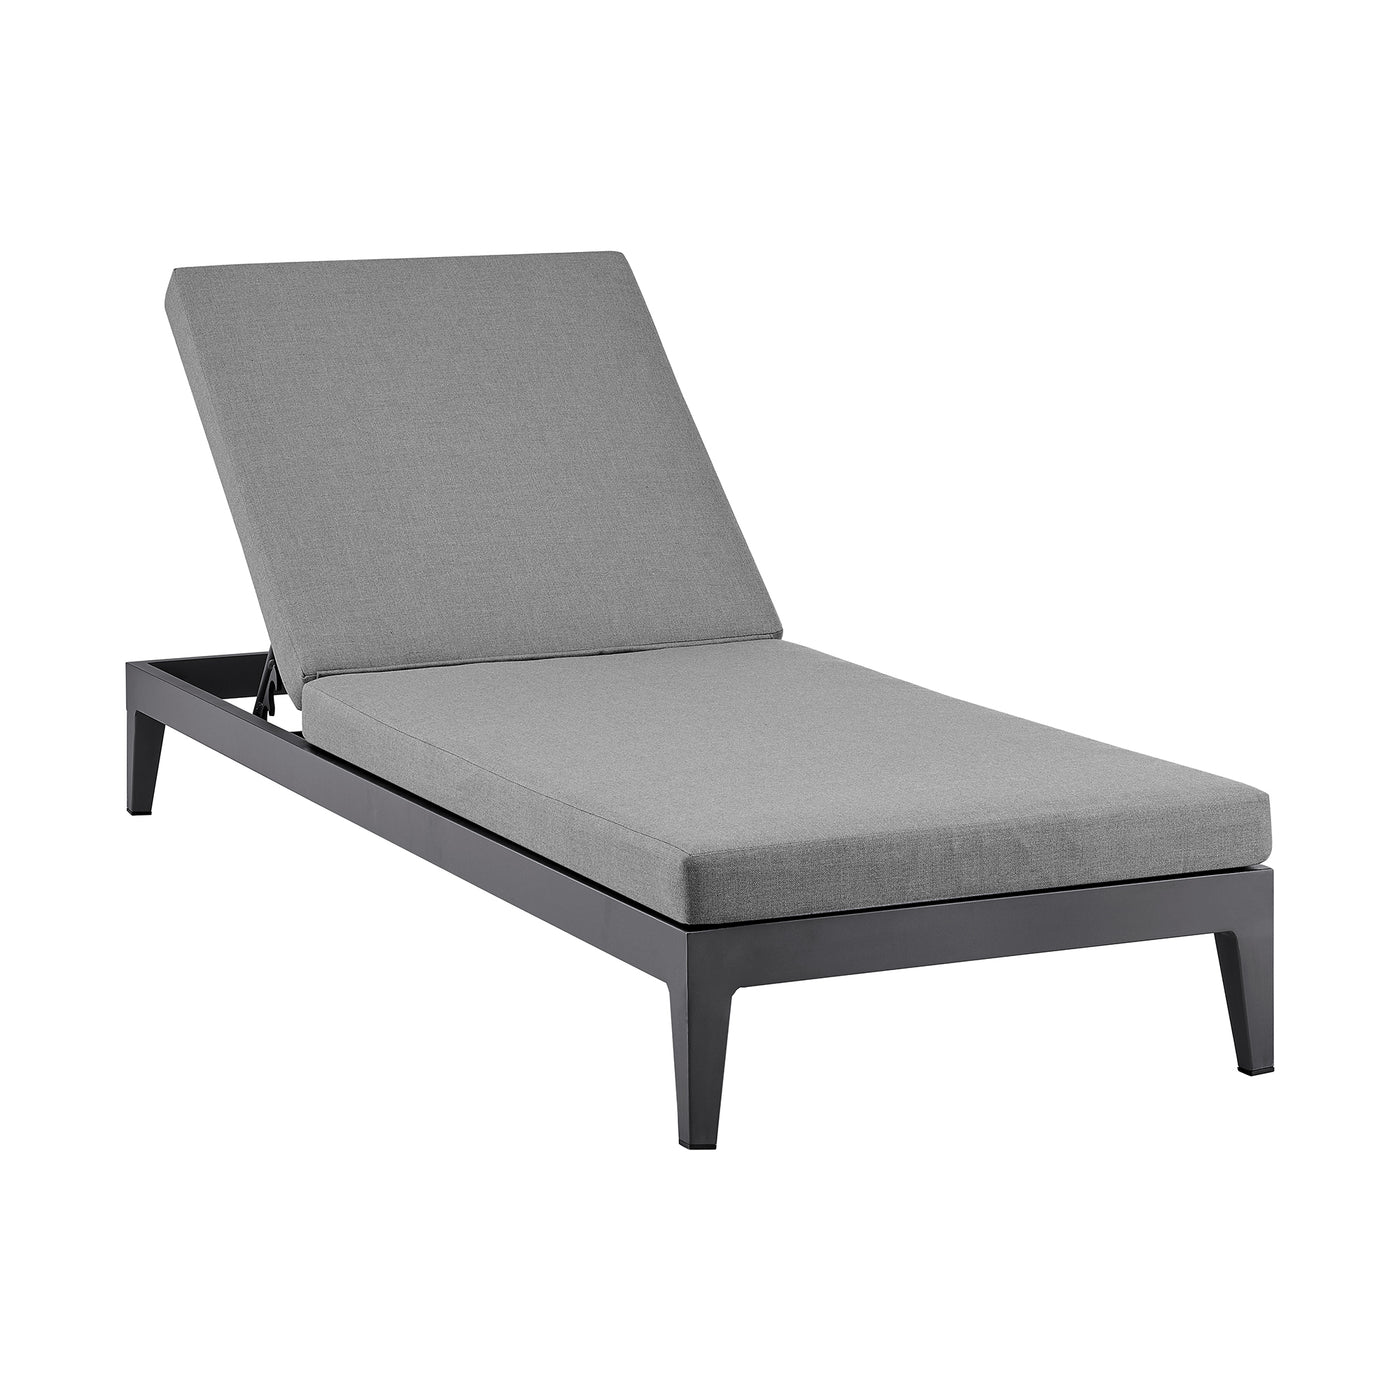 Menorca Outdoor Chaise Lounge